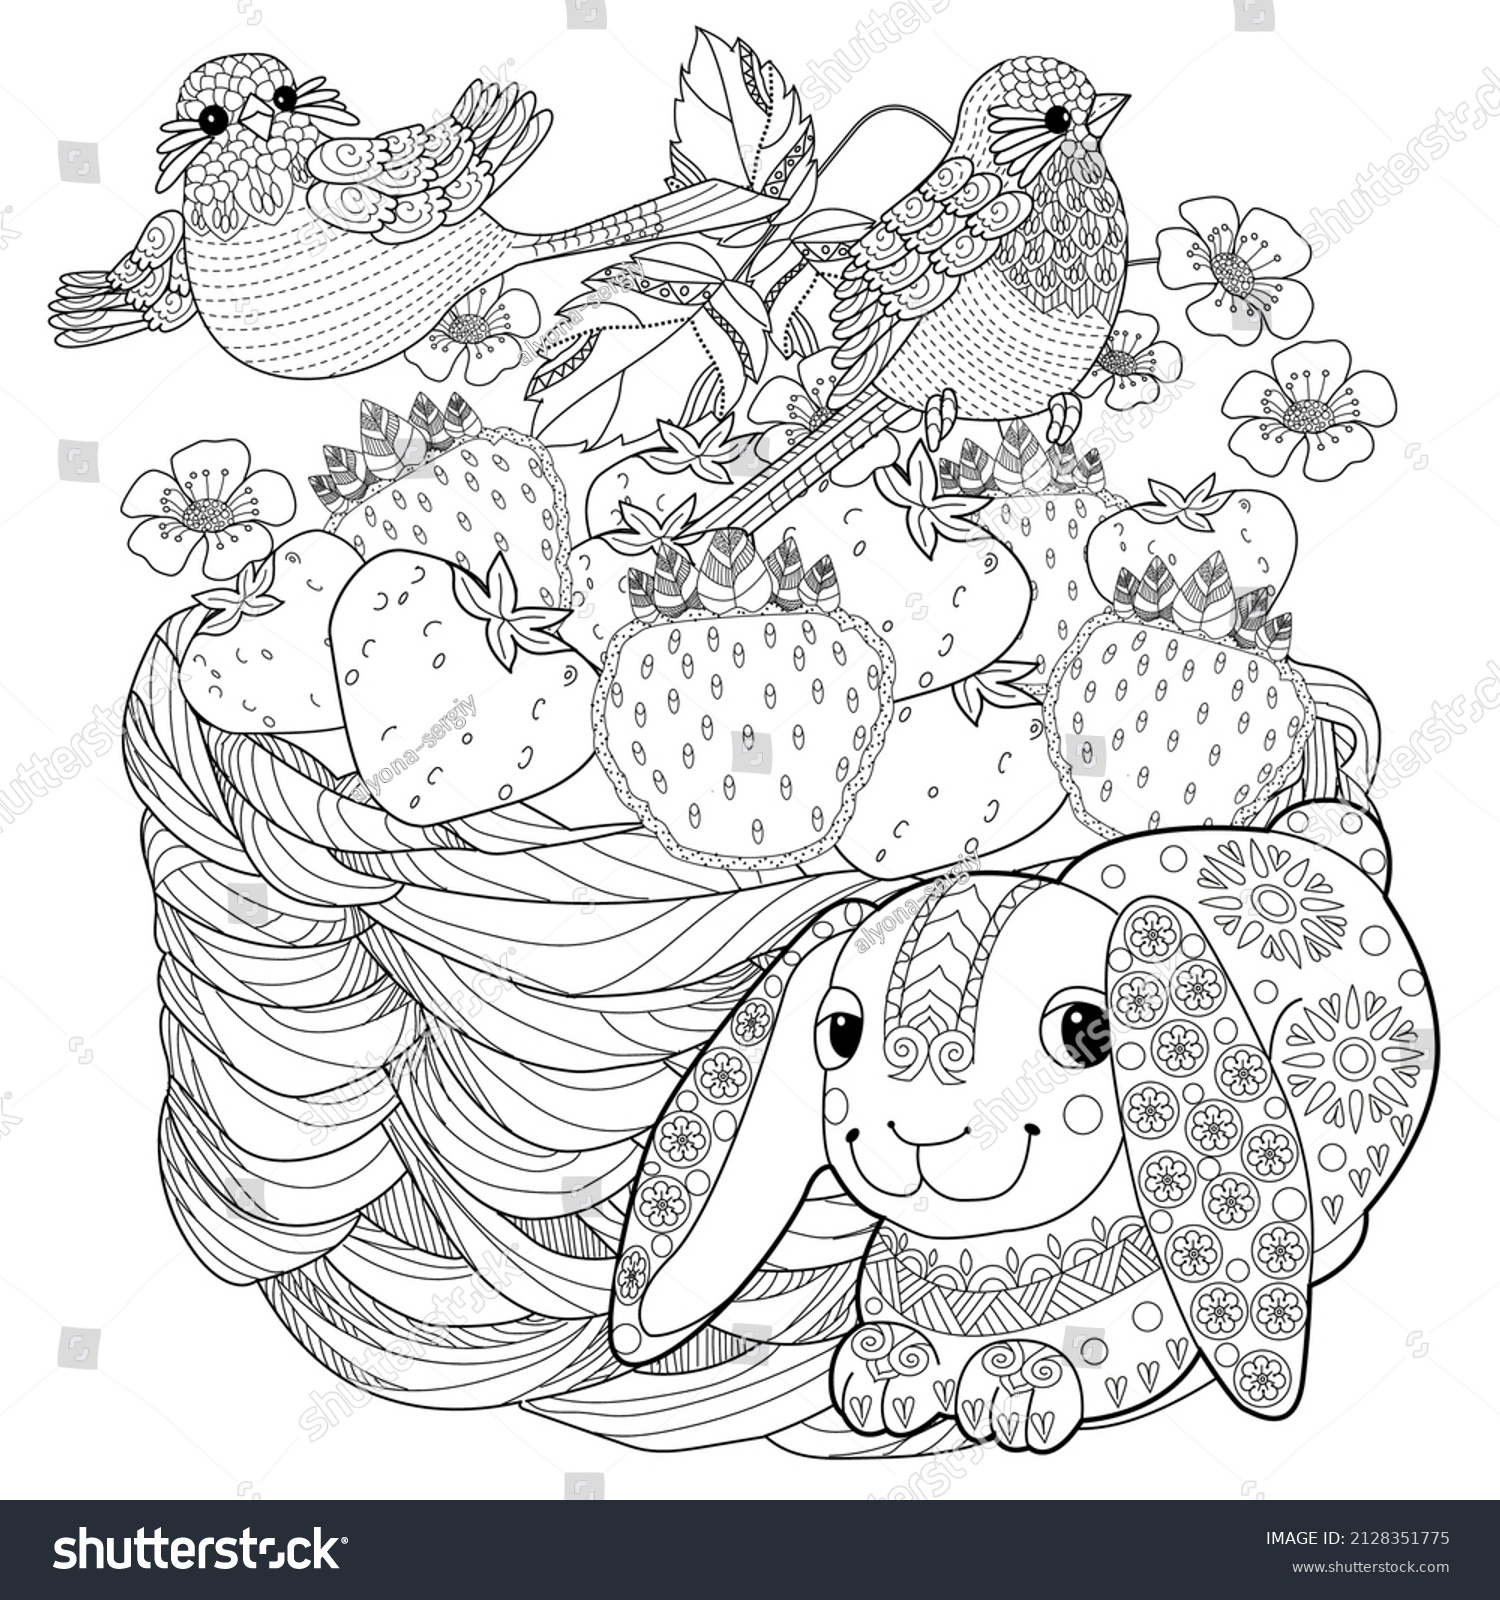 Art Therapy Coloring Page Coloring Book Stock Vector (Royalty Free ...